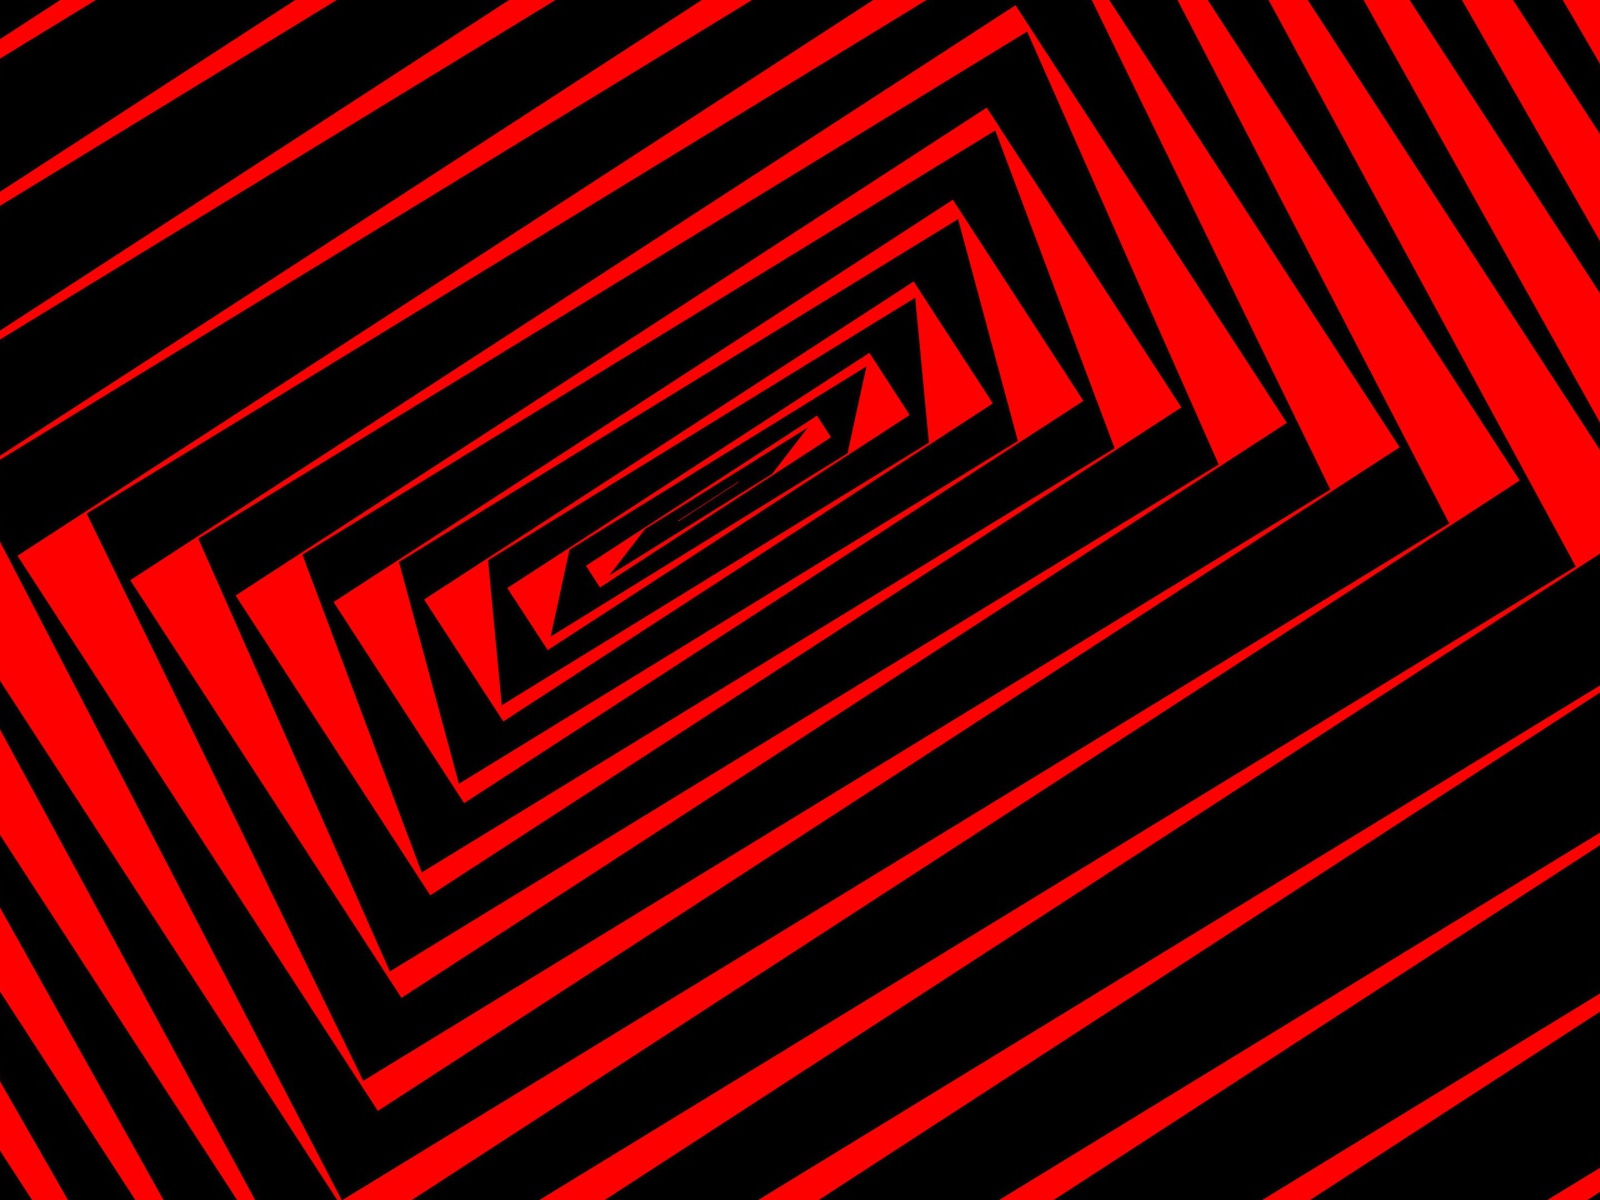 Black and red spiral lines, illusion